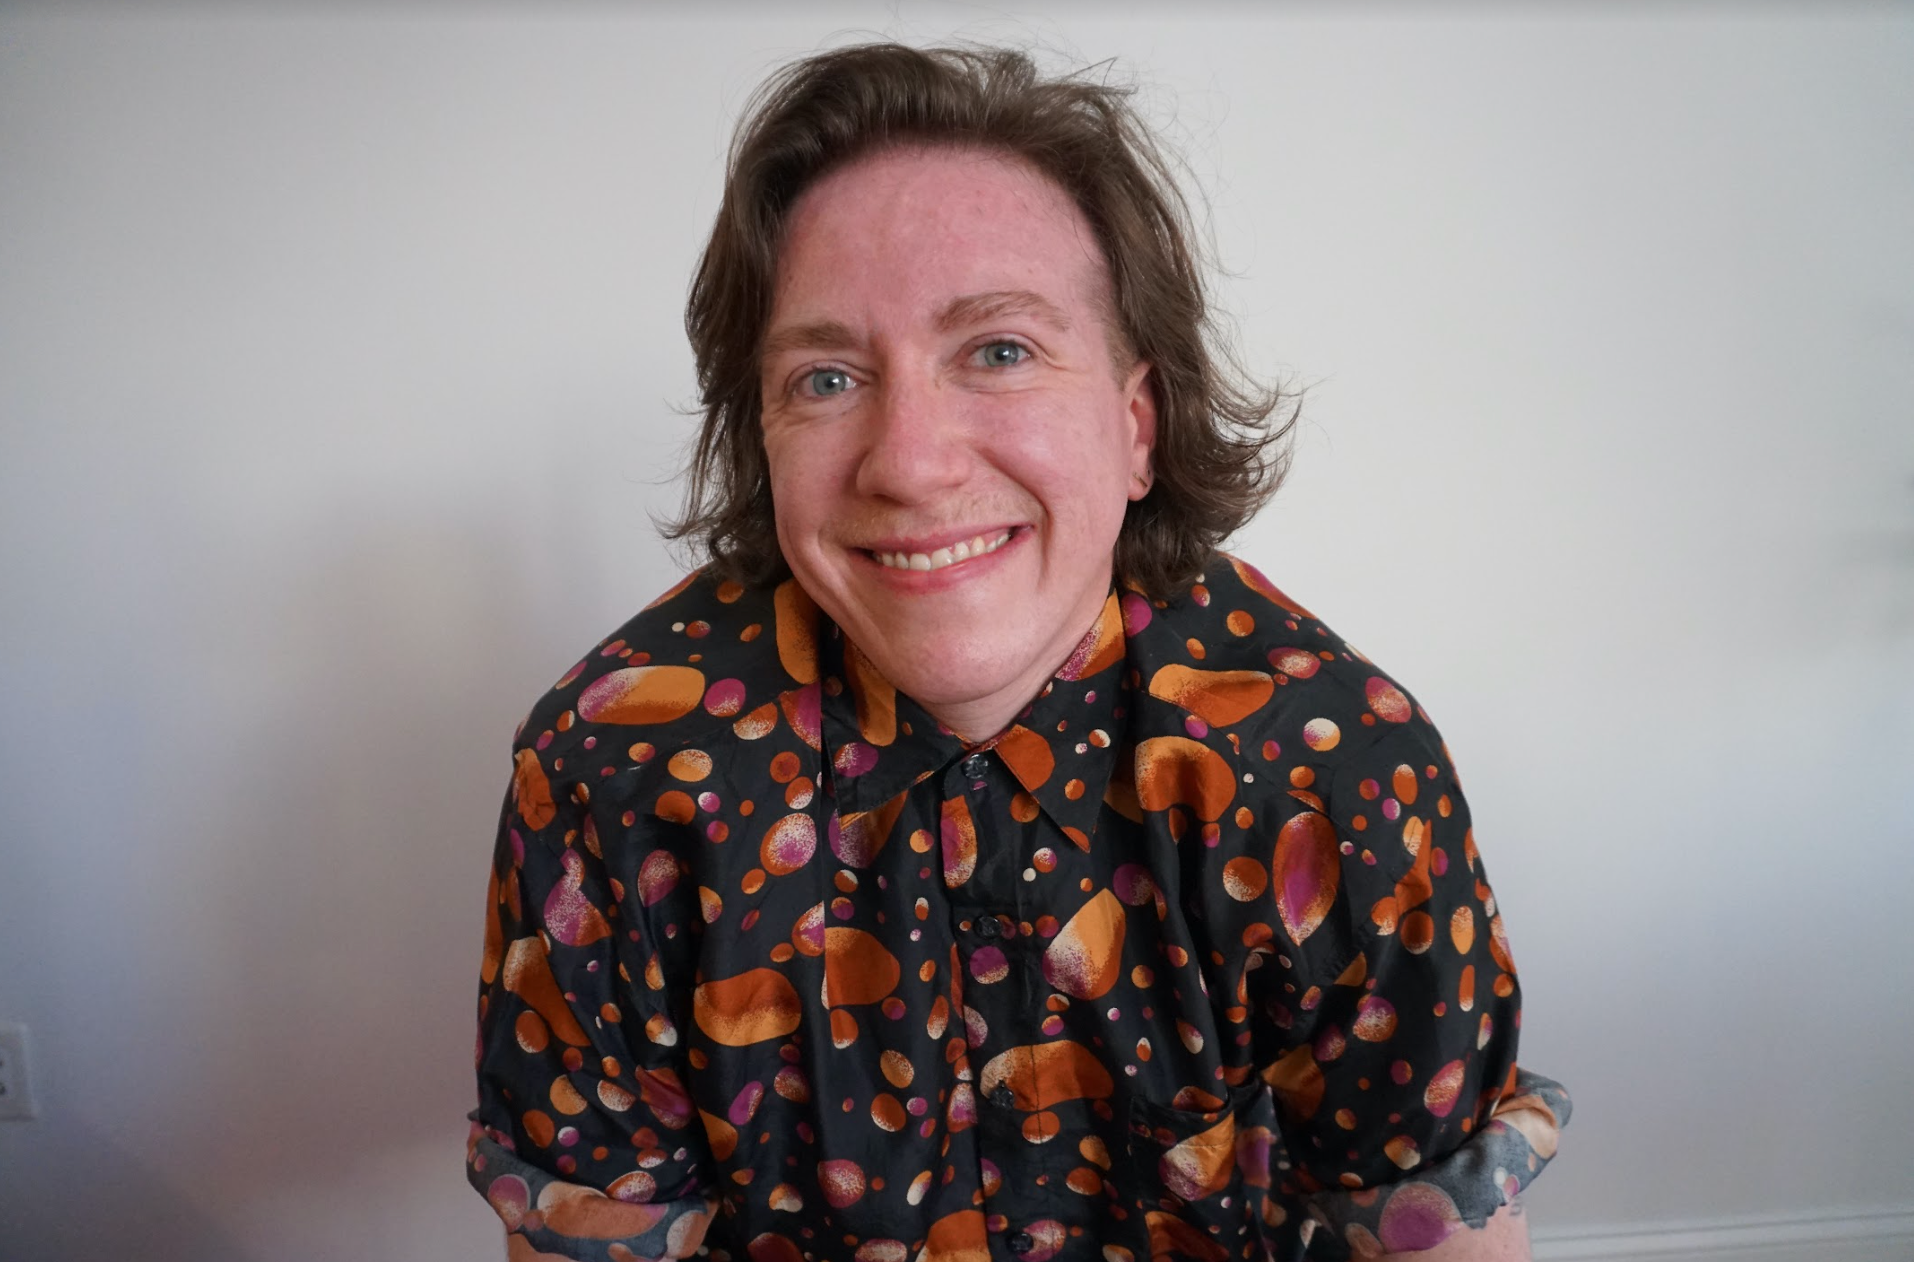 Megan, a white nonbinary person with shoulder-length brown hair, is inside, pictured against a gray wall. They are smiling and wearing a black button-down silk shirt with a celestial potato pattern.